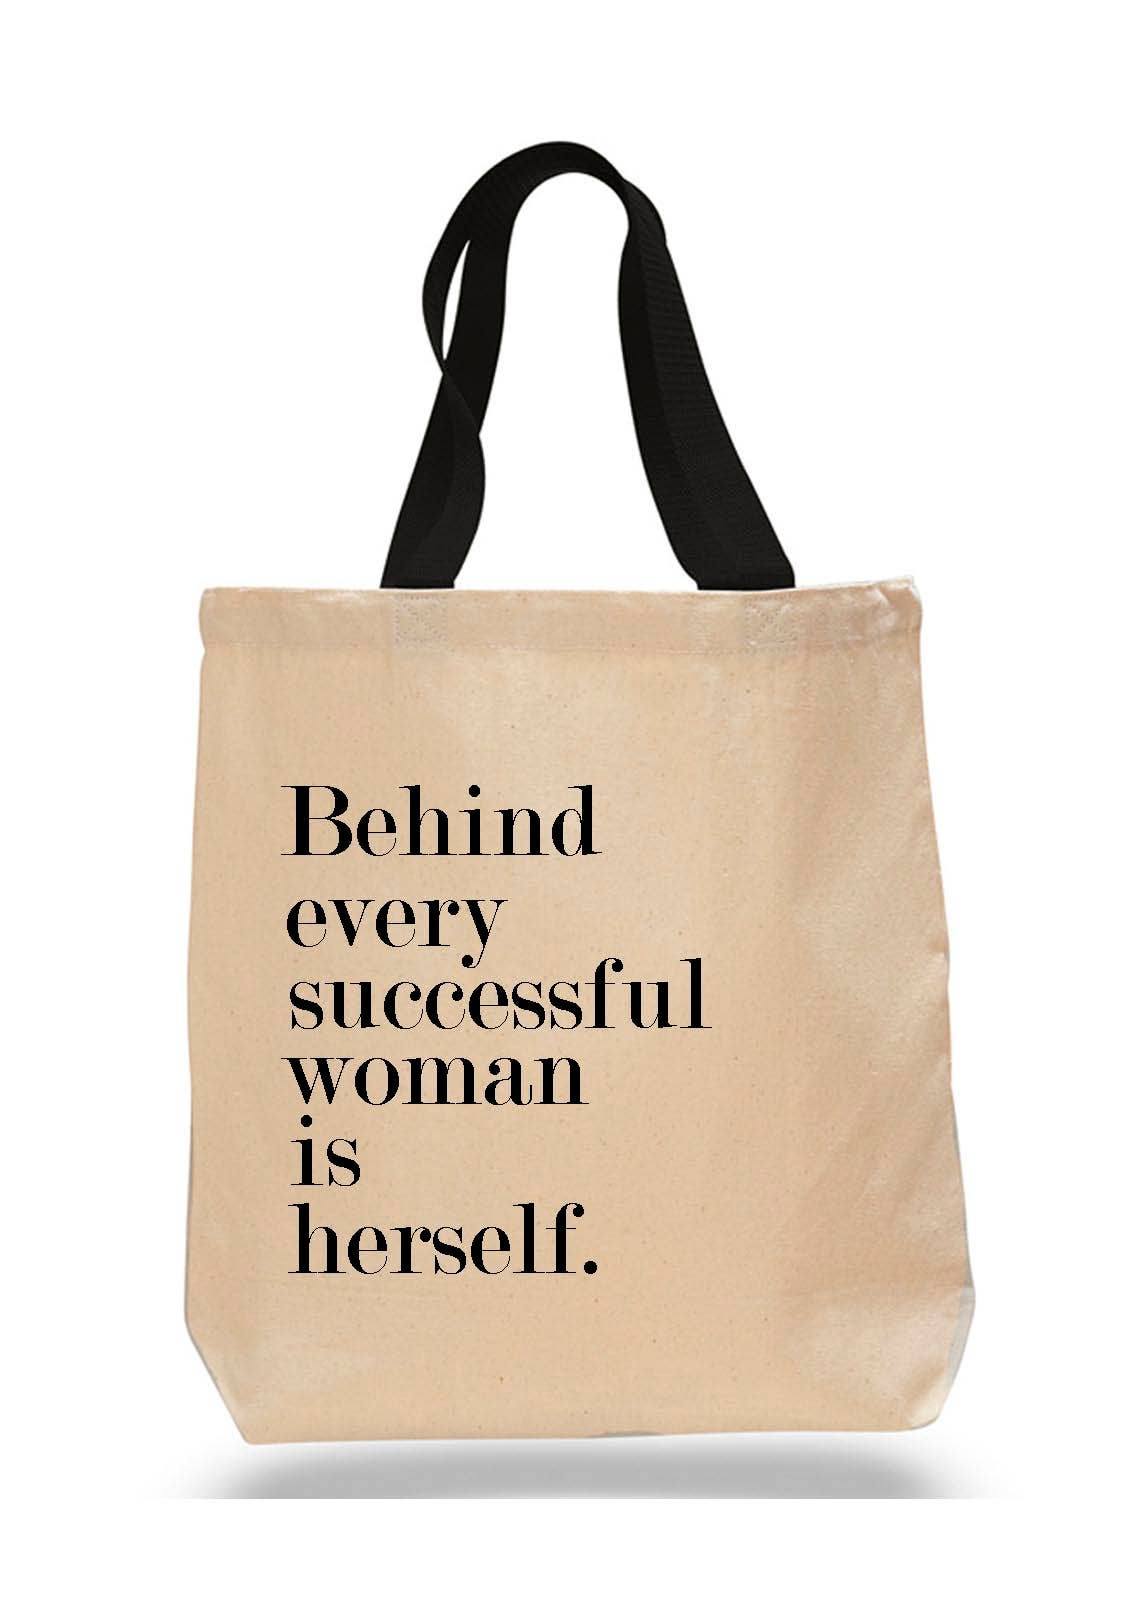 Behind Every Successful Woman is Herself Tote Bag